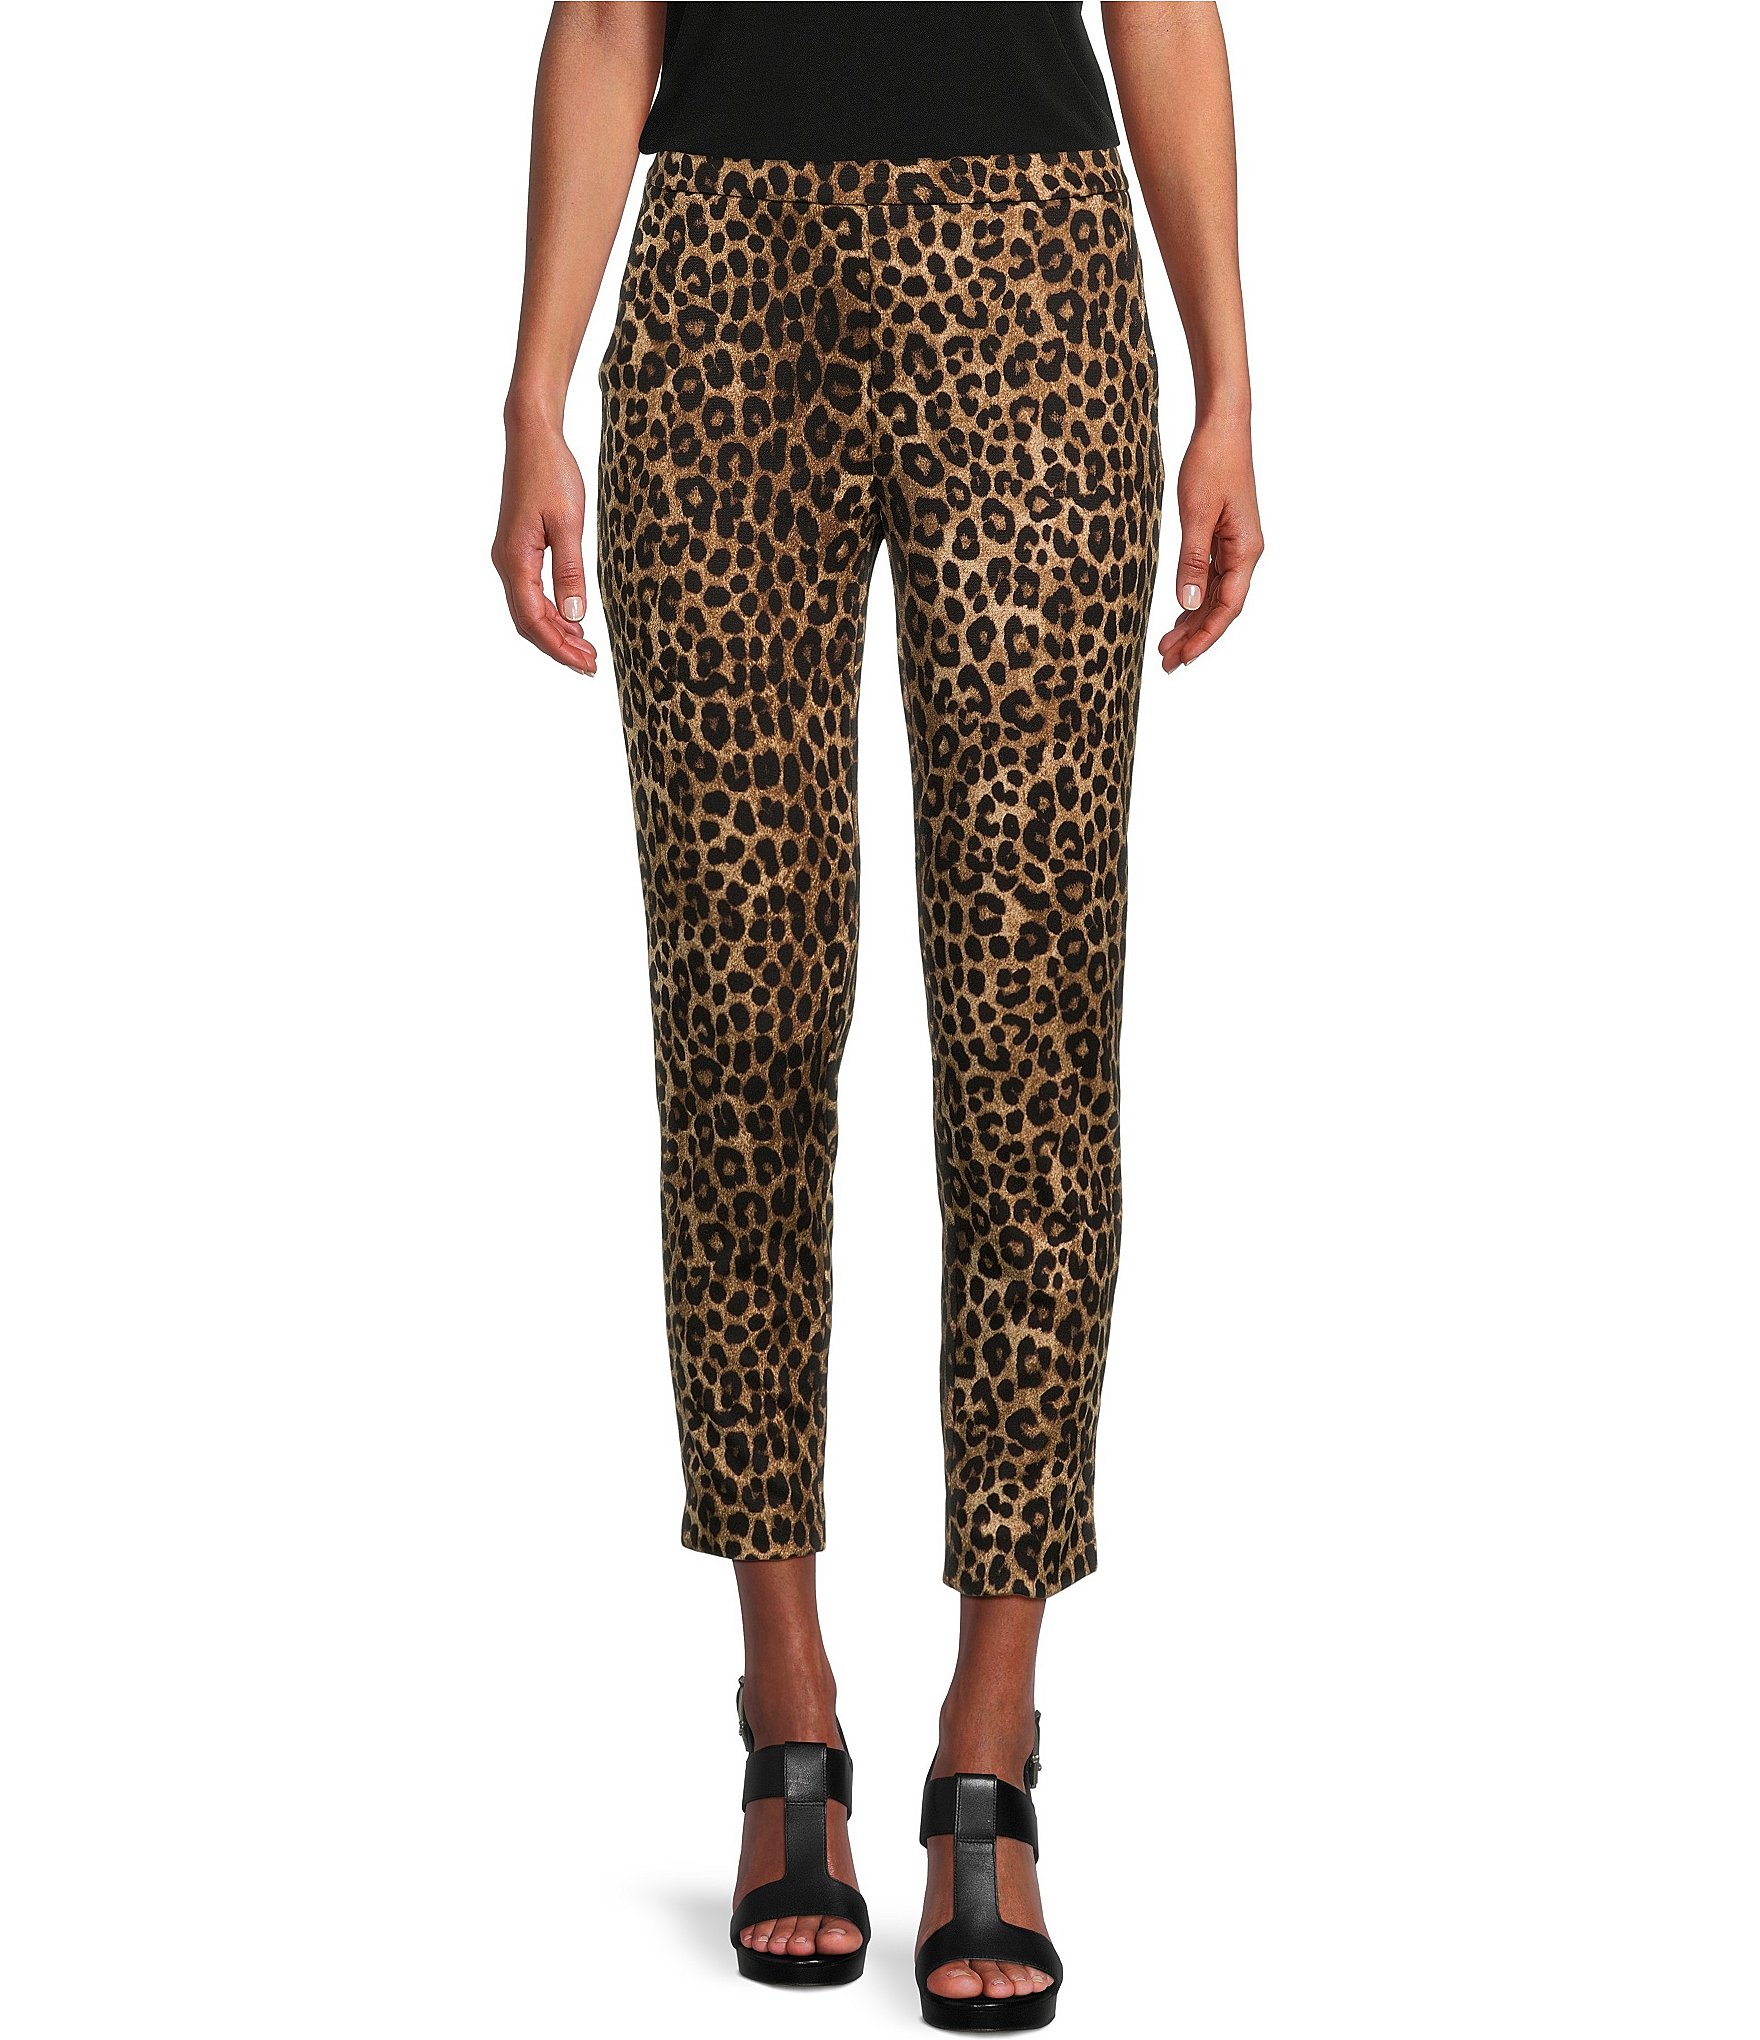 Michael Kors casual leggings, These pants are quite